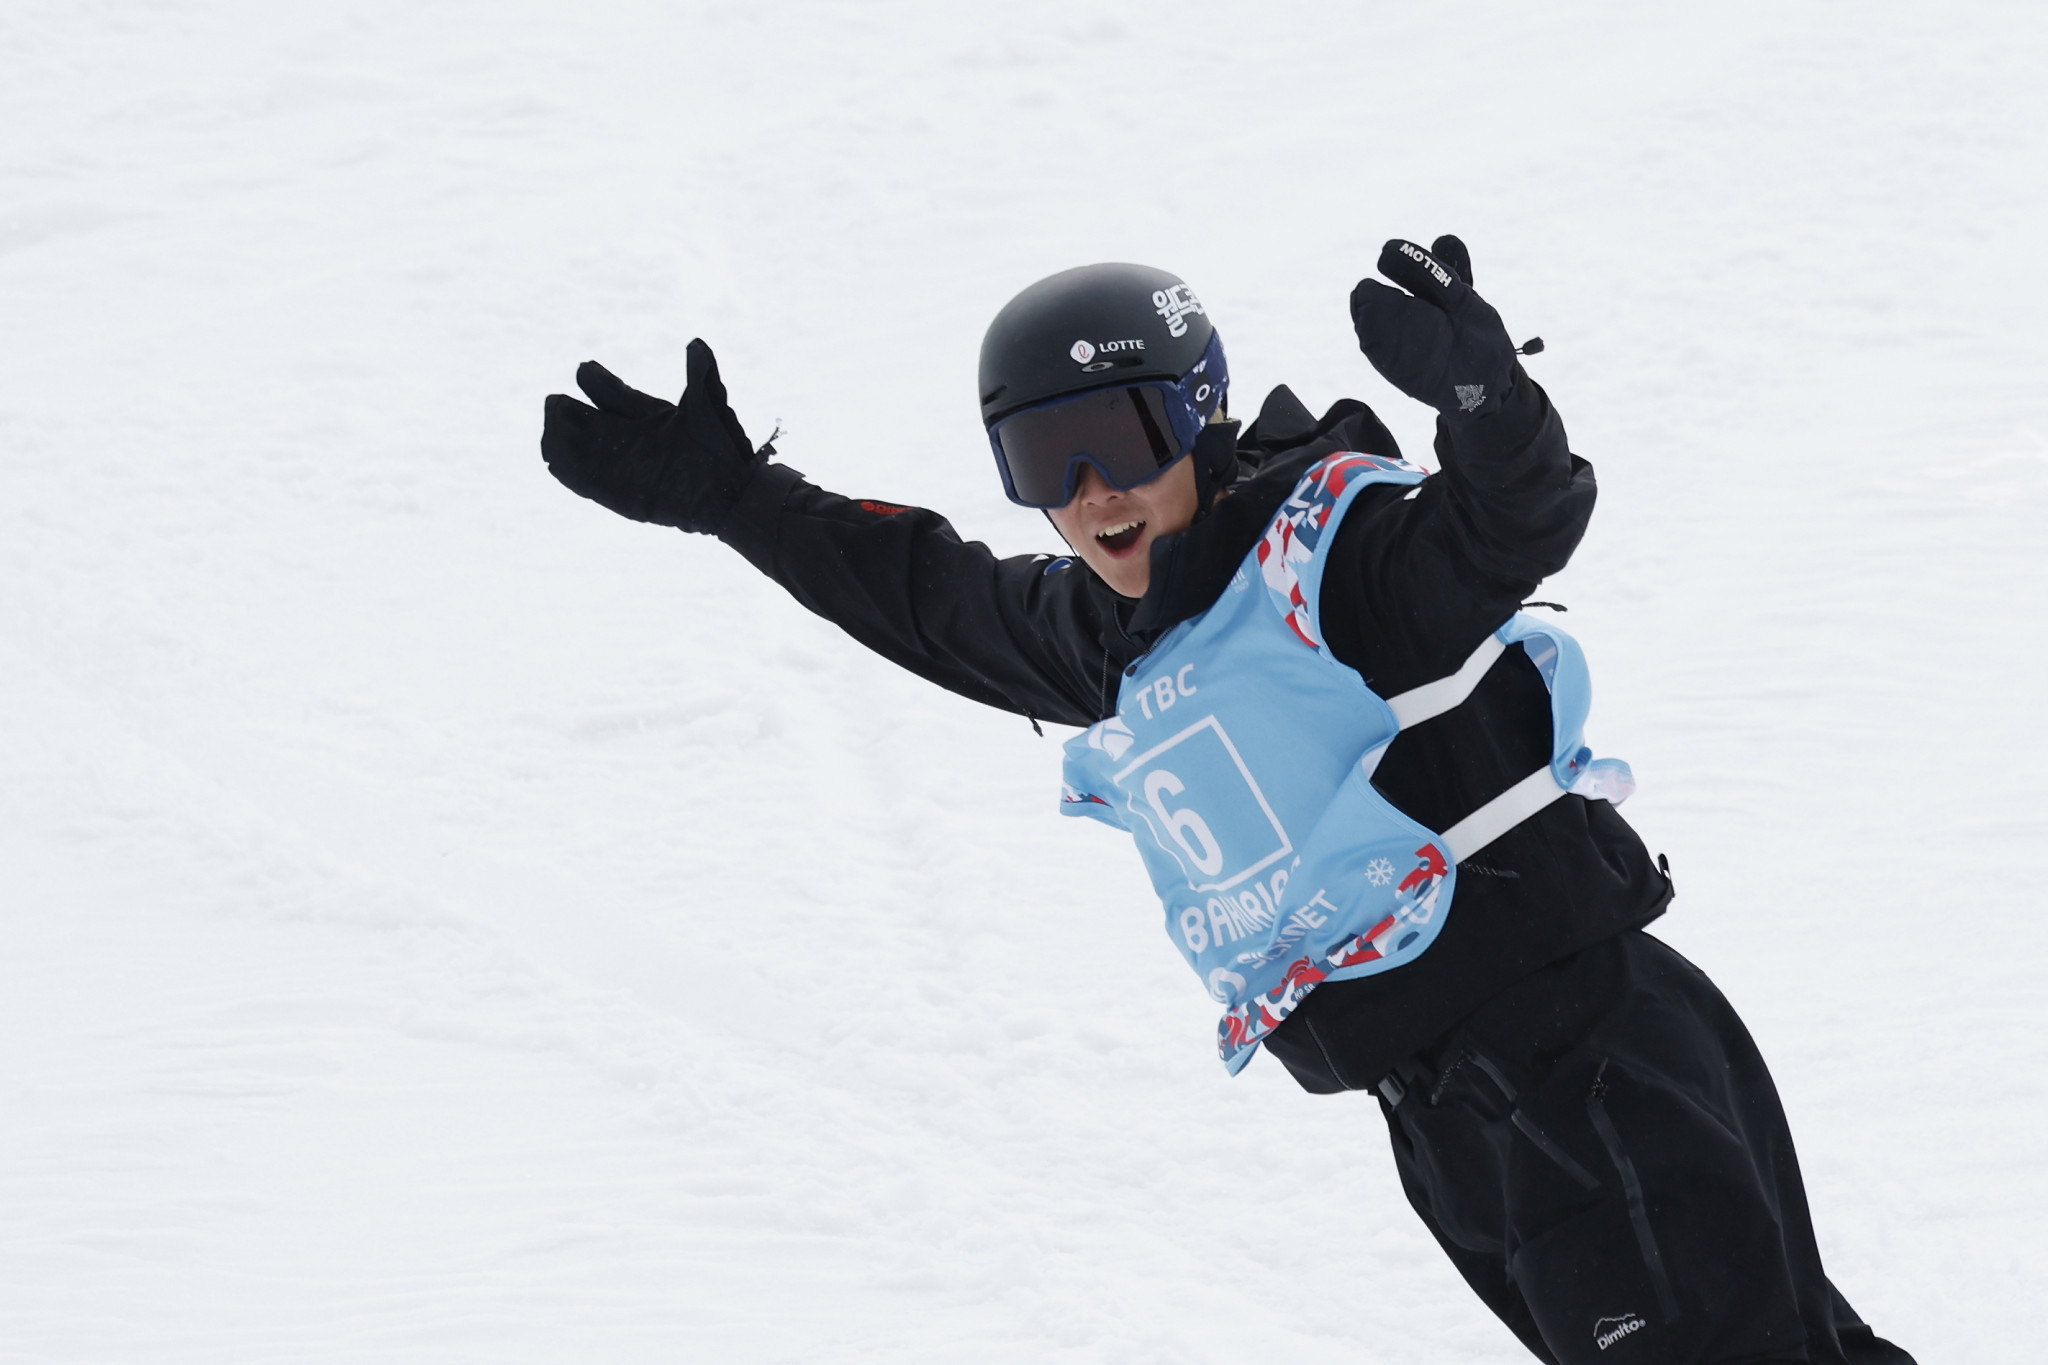 South Korea's 16-year-old Lee Chae-un claimed a remarkable victory in the men's halfpipe snowboard in Bakuriani ©Getty Images